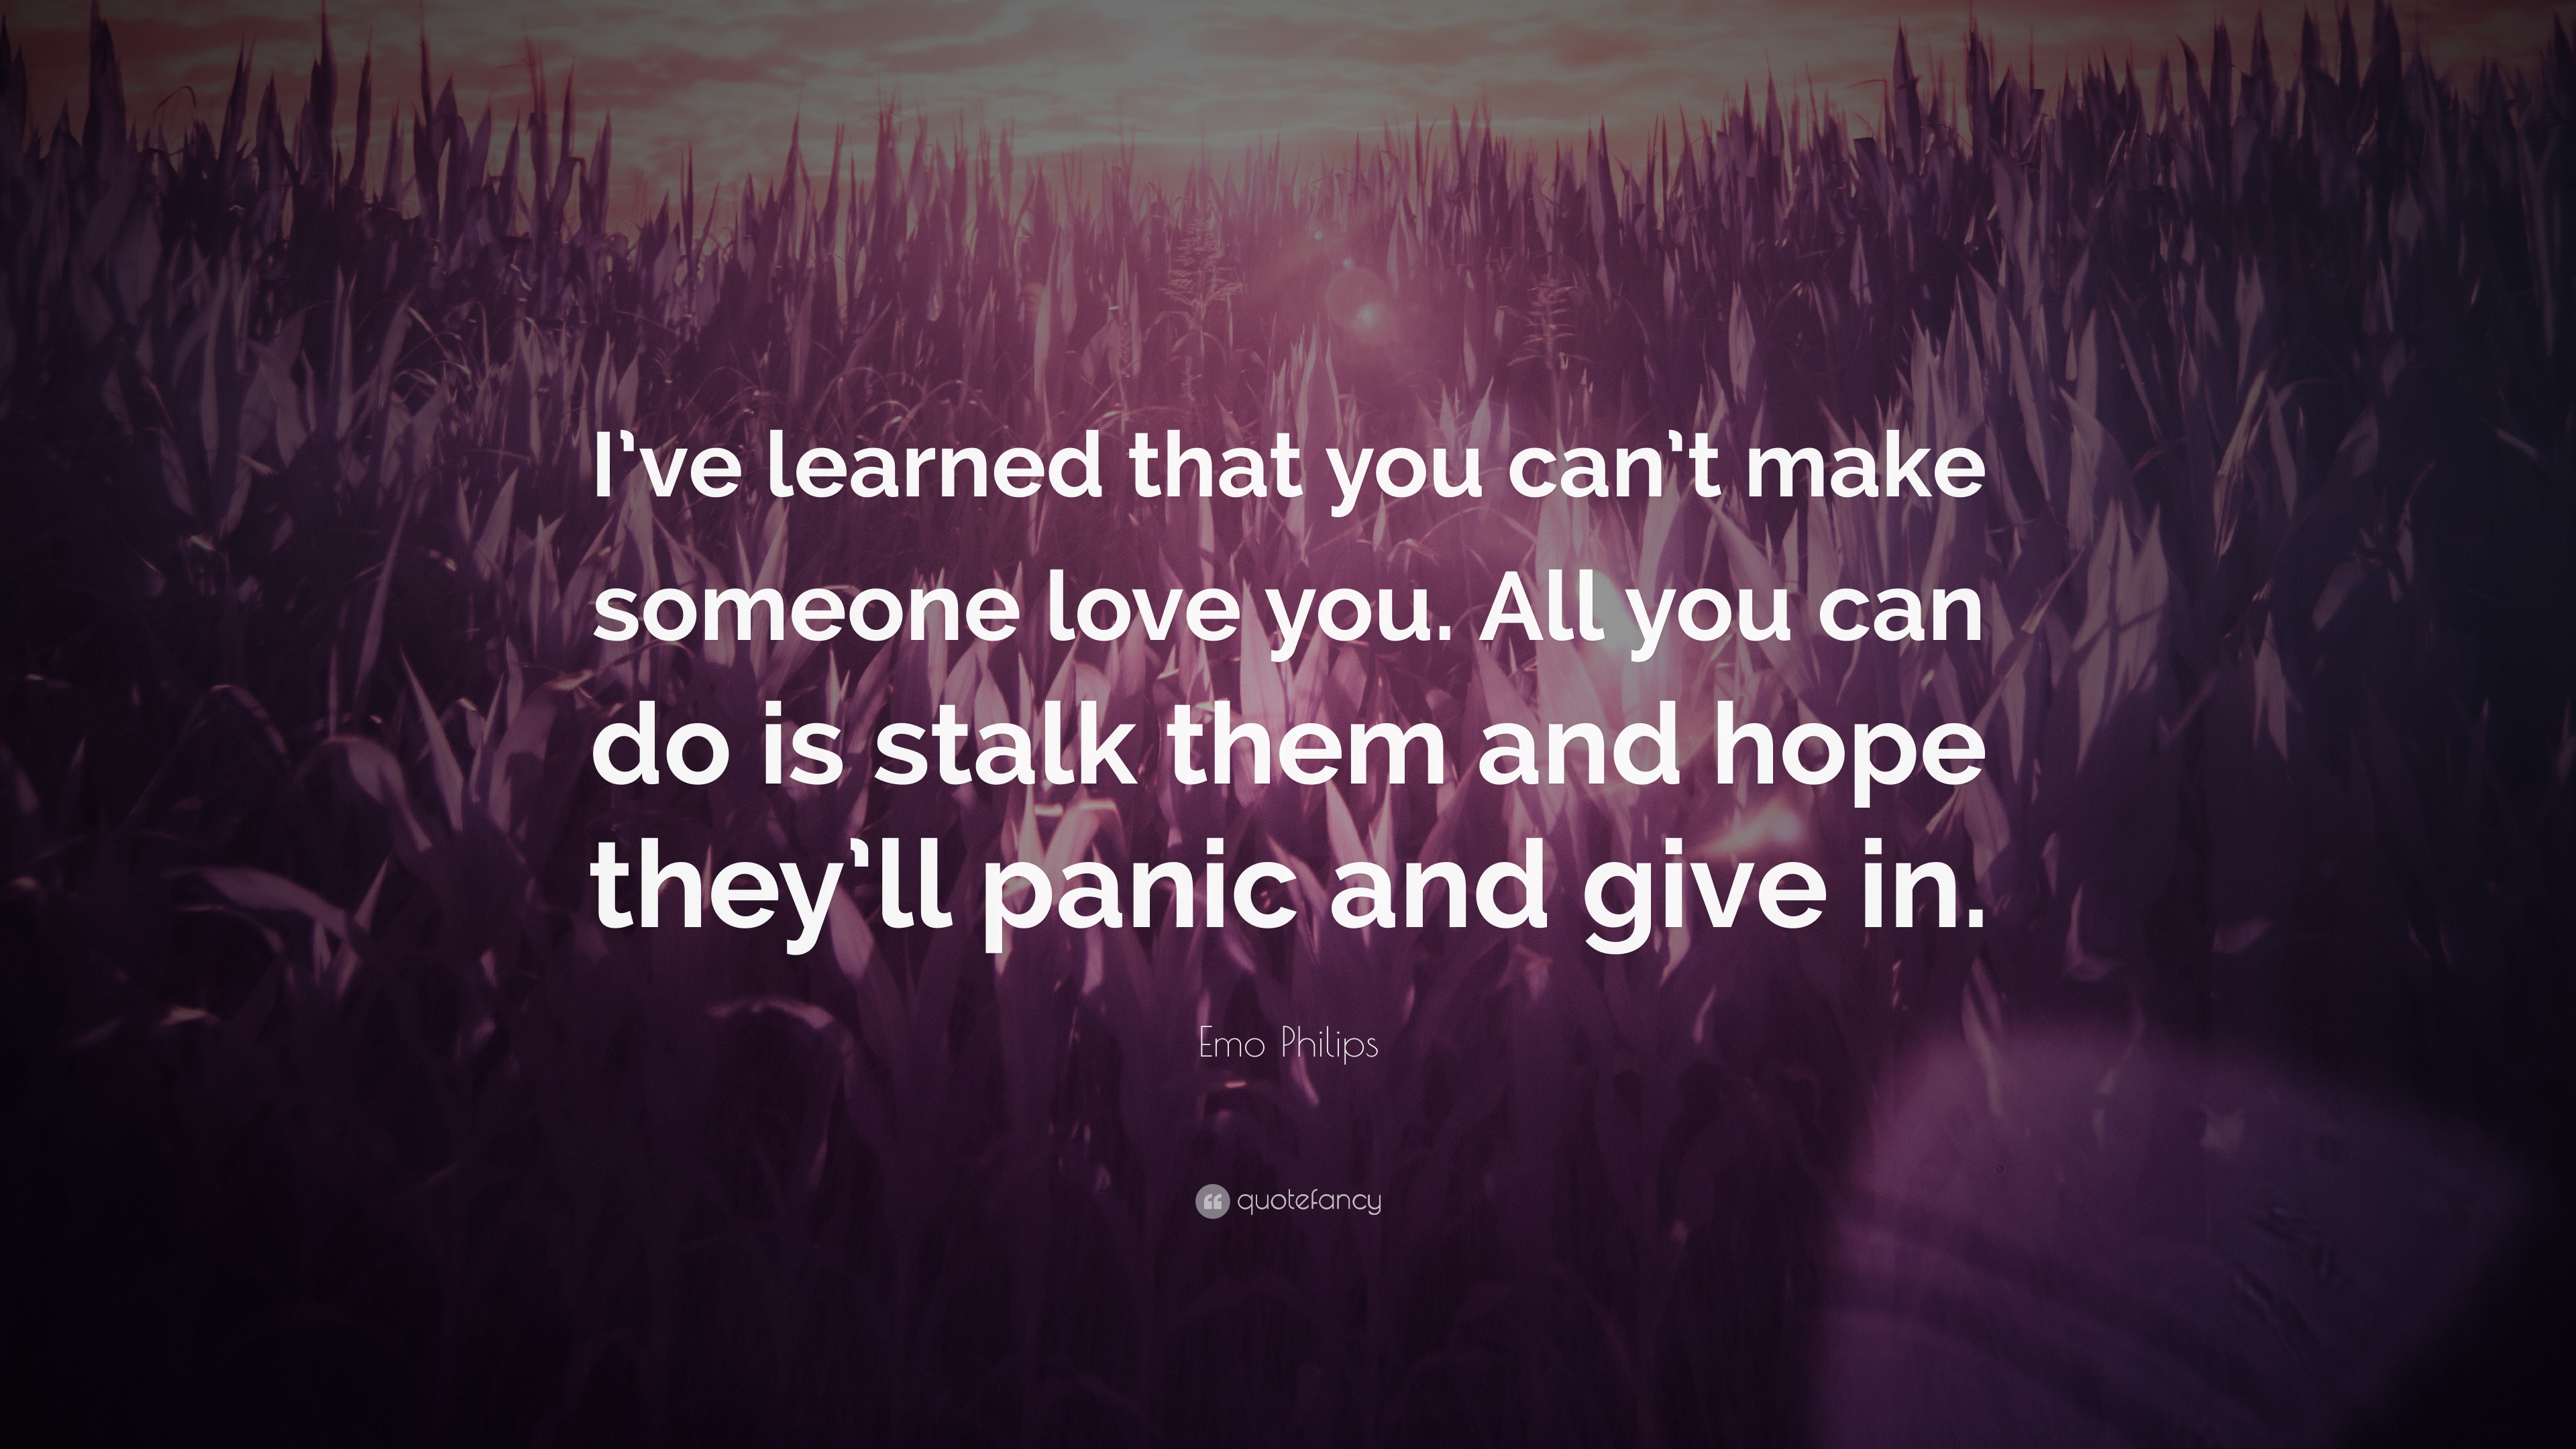 Emo Philips Quote “I ve learned that you can t make someone